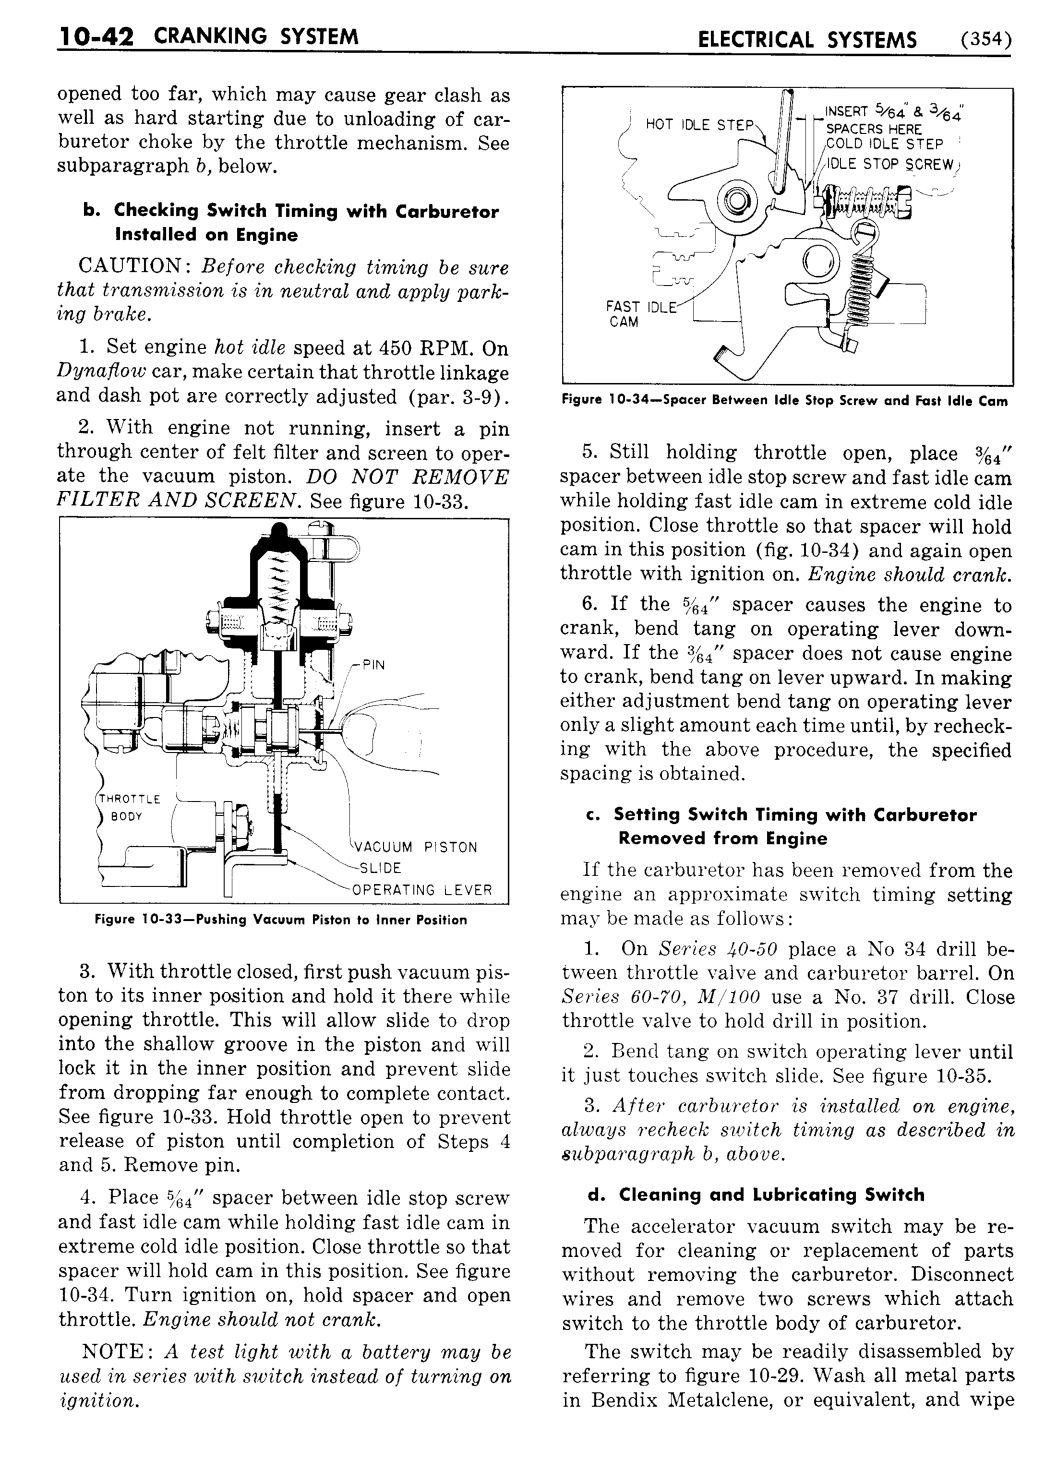 n_11 1954 Buick Shop Manual - Electrical Systems-042-042.jpg